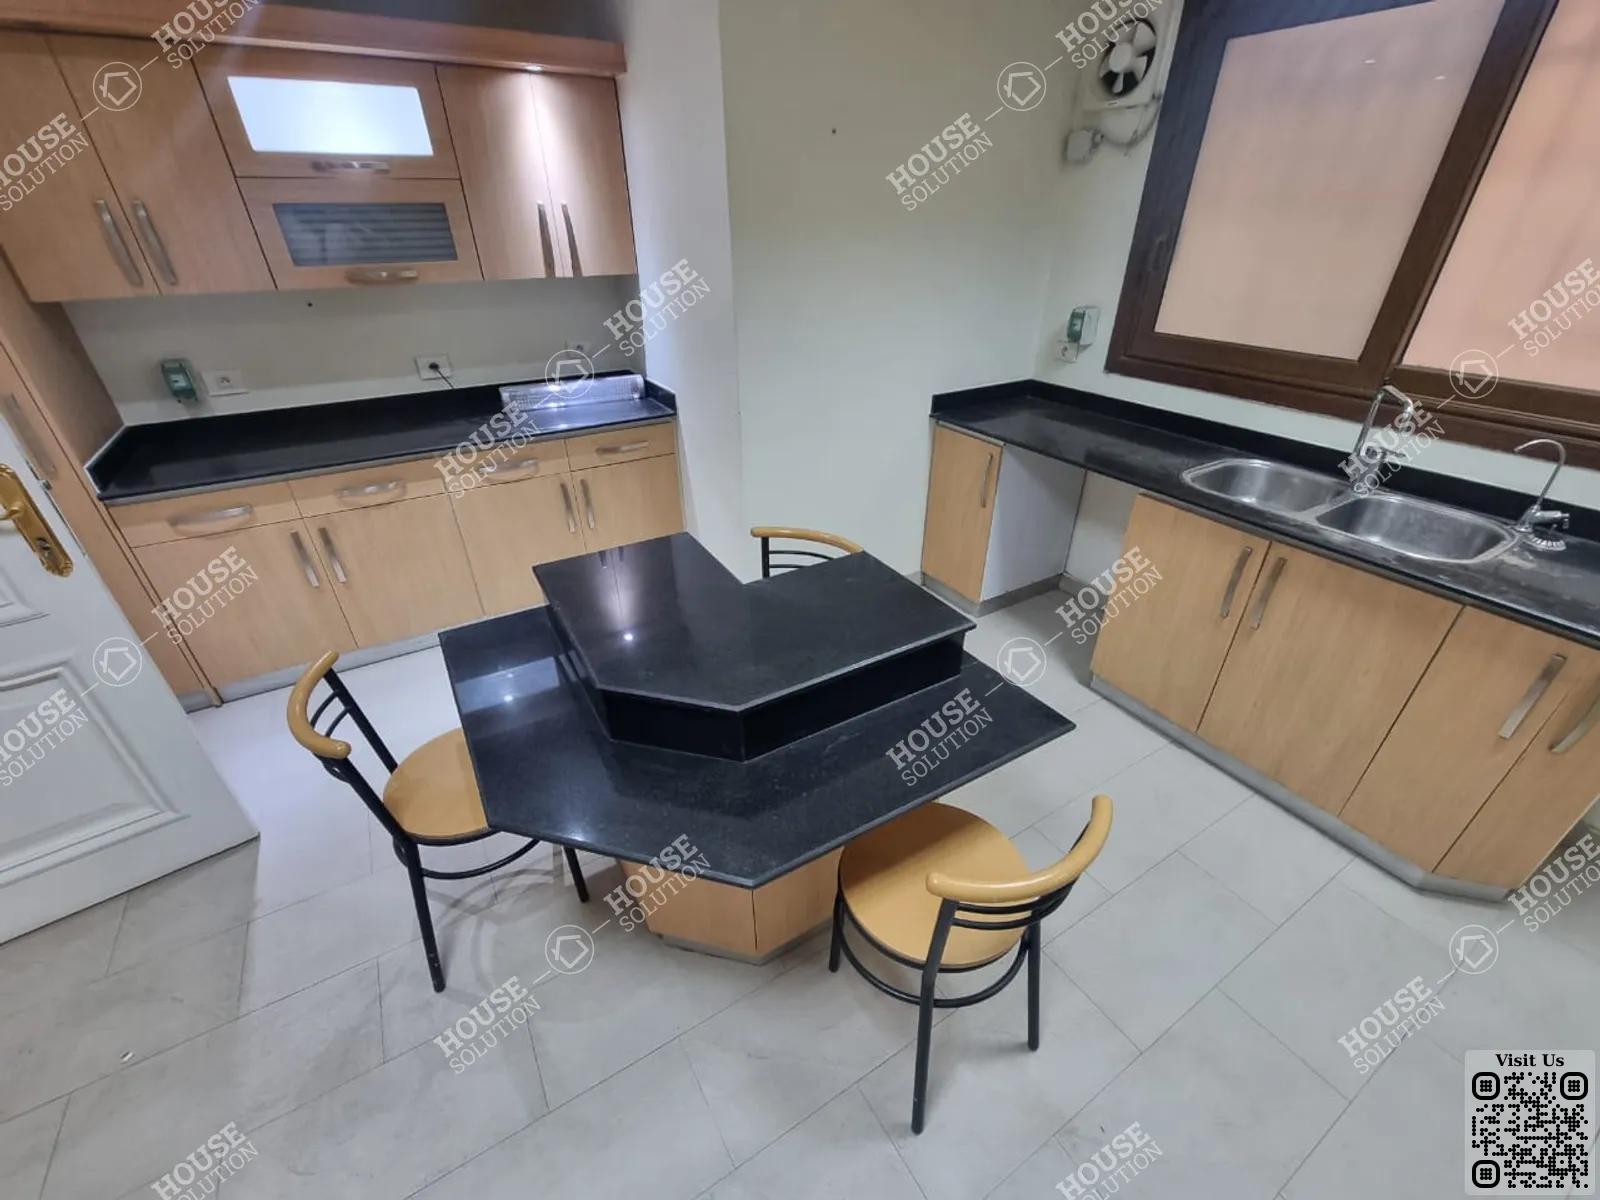 KITCHEN  @ Apartments For Rent In Maadi Maadi Sarayat Area: 265 m² consists of 4 Bedrooms 4 Bathrooms Modern furnished 5 stars #5772-1